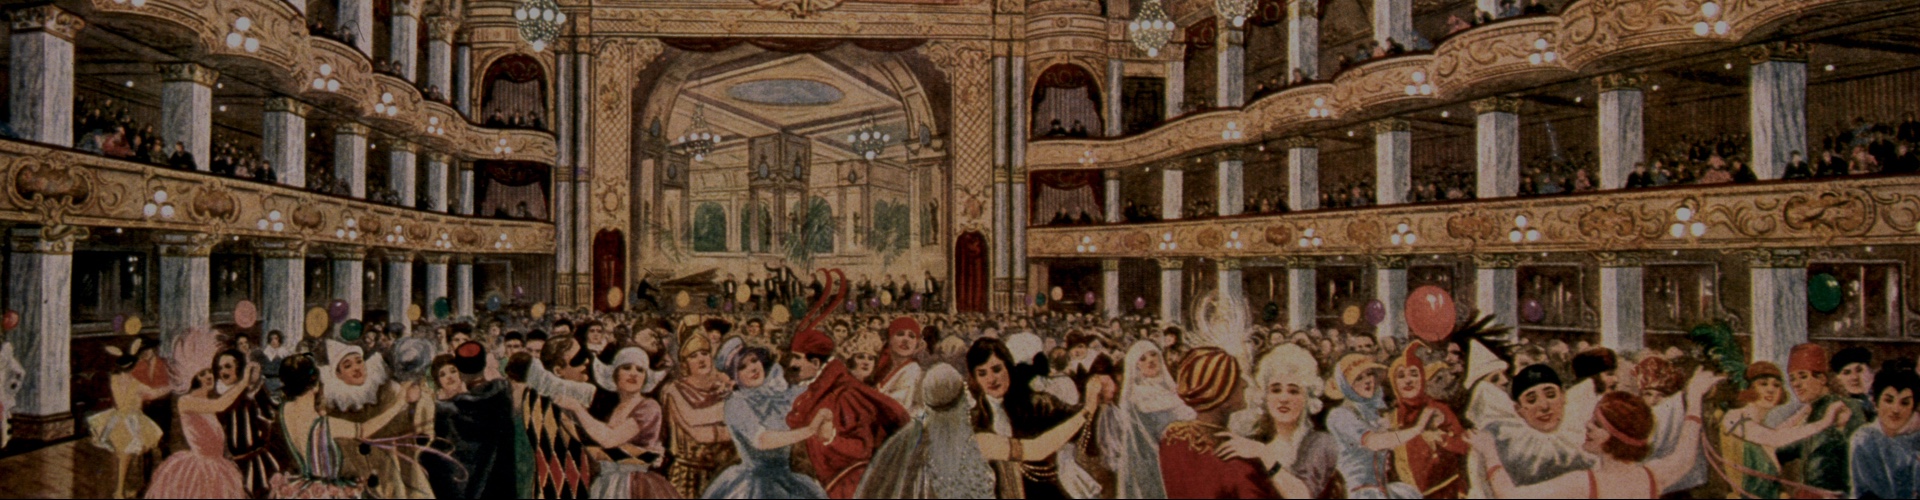 Illustrated view of an audience at the Ballroom Blackpool Tower